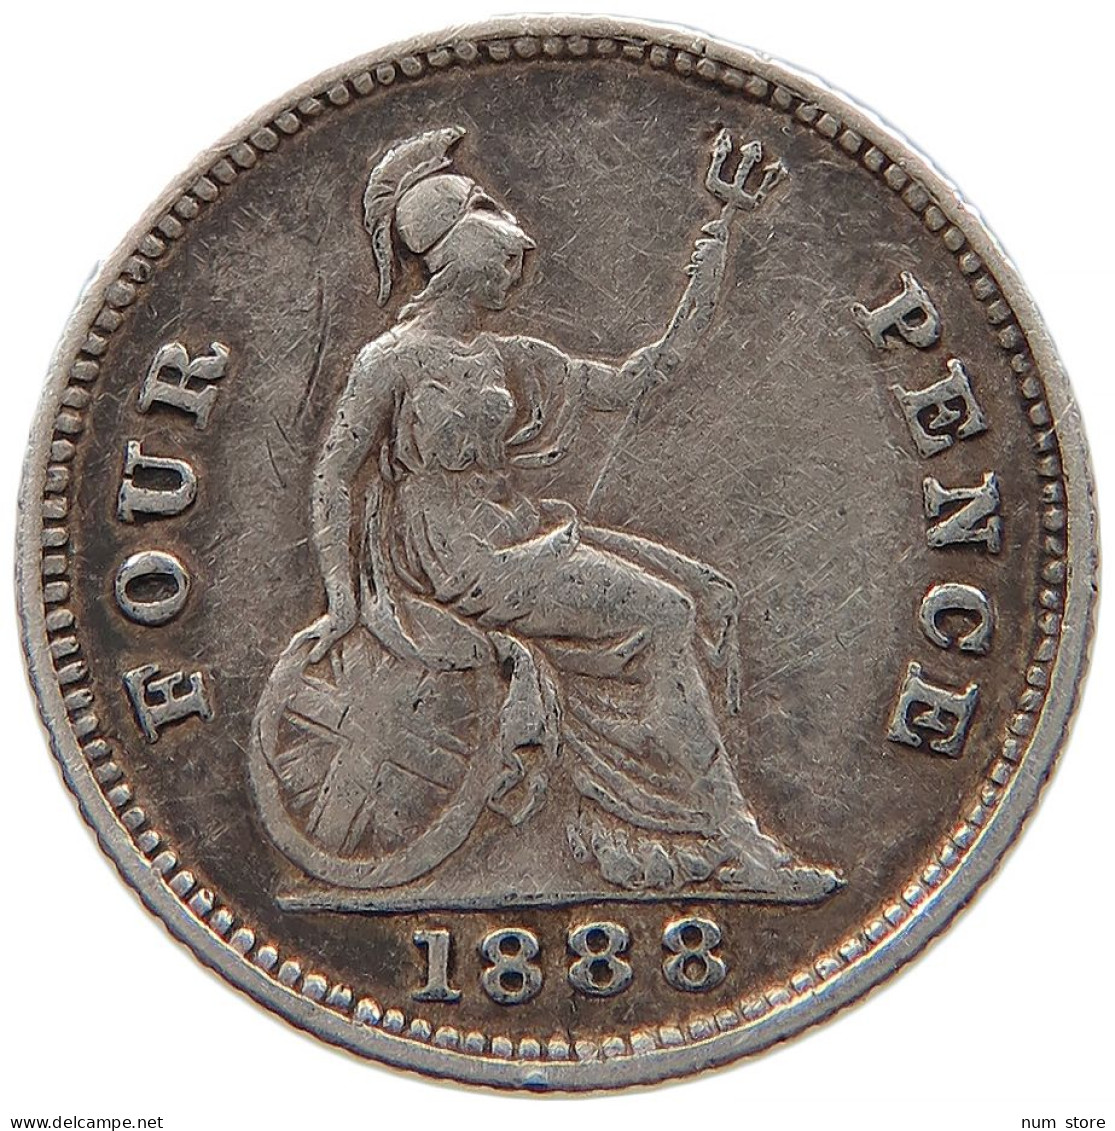 GREAT BRITAIN FOURPENCE 1888 Victoria 1837-1901 #t021 0119 - G. 4 Pence/ Groat